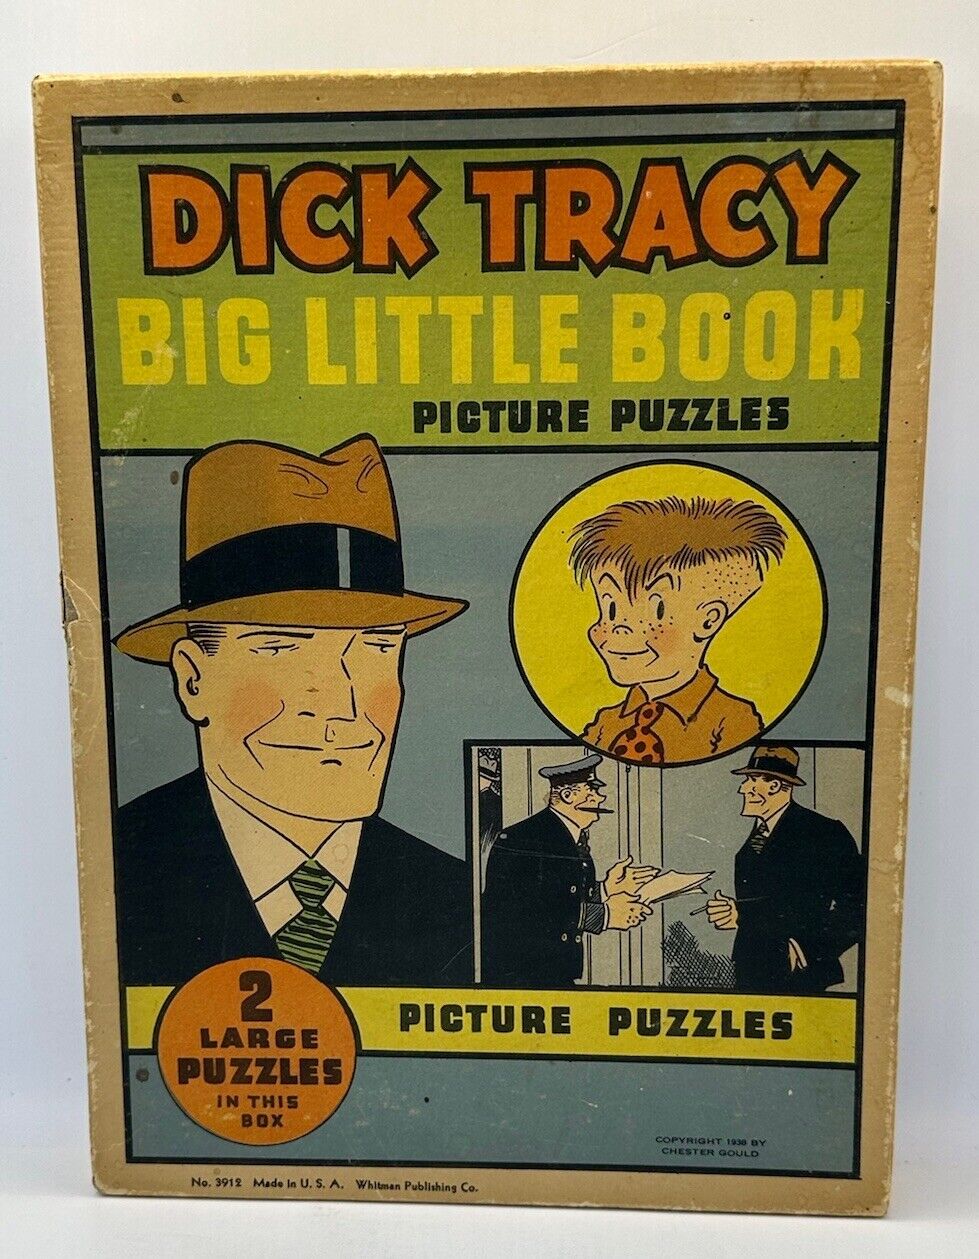 DICK TRACY SCARCE BIG LITTLE BOOK PUZZLES IN ORIGINAL BOX 1938 WHITMAN NO RES